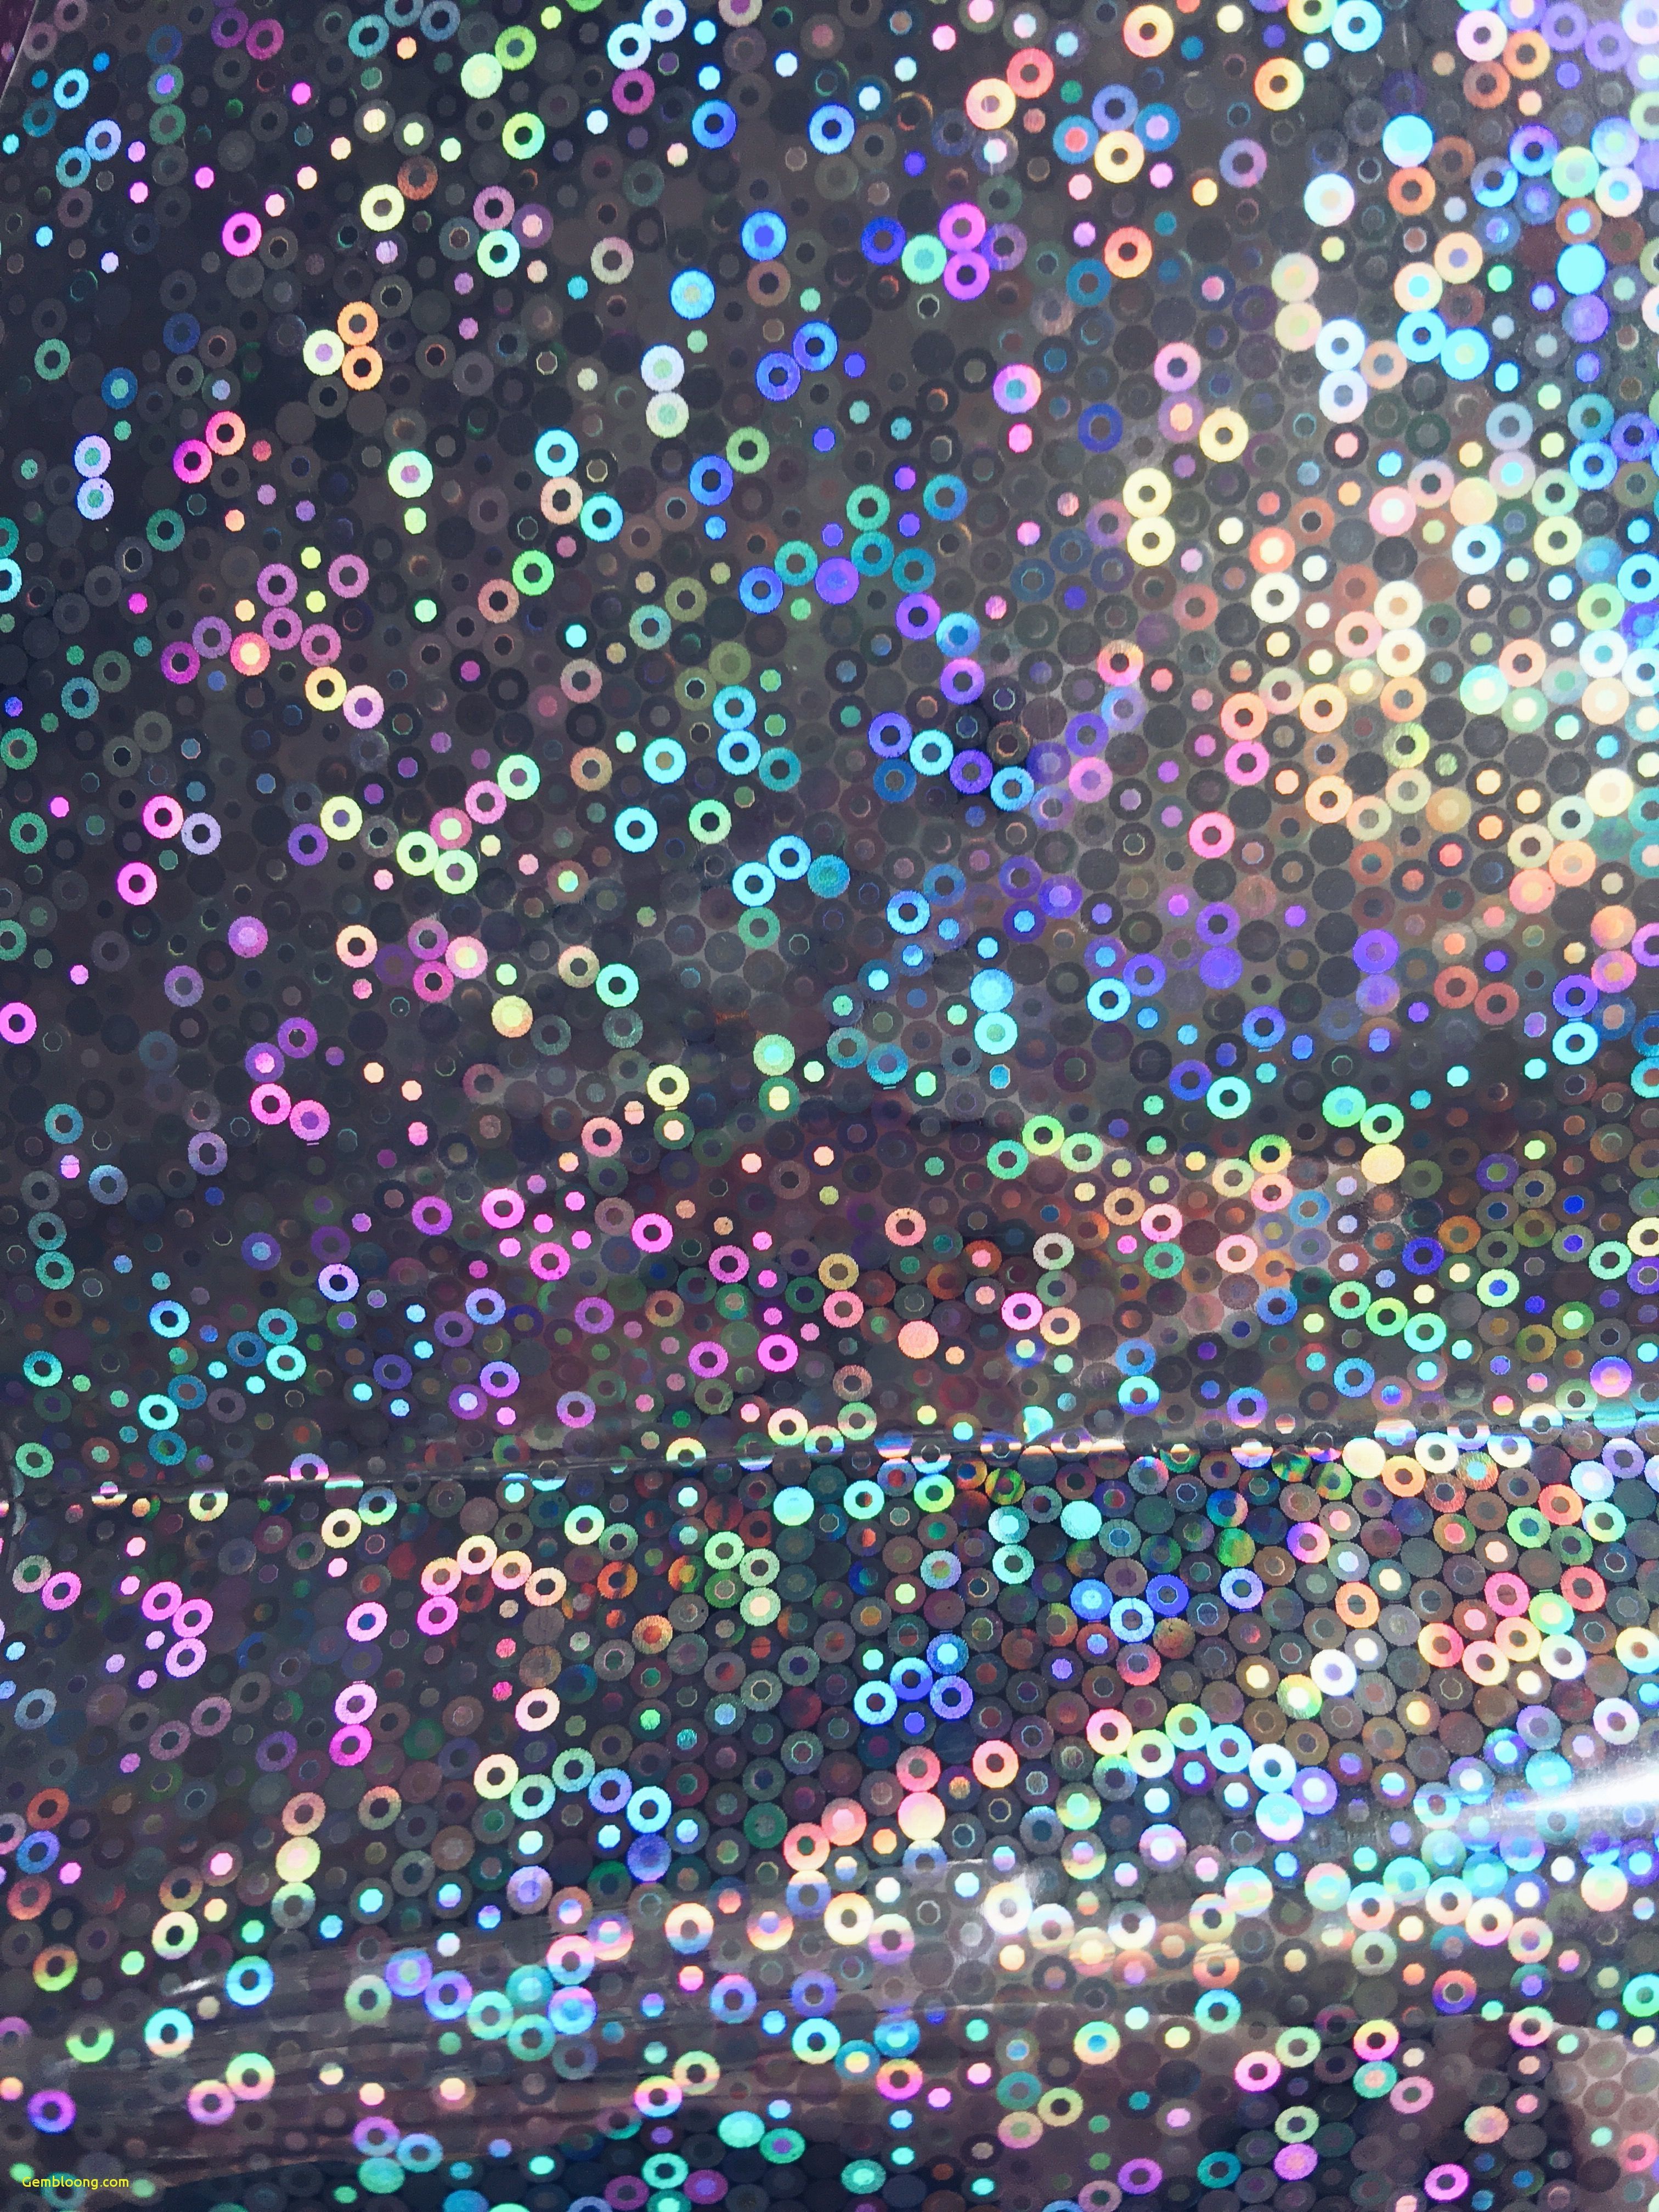 Holographic Background 80s 90s Colorful Wallpaper Stock Illustration  1588803049  Shutterstock